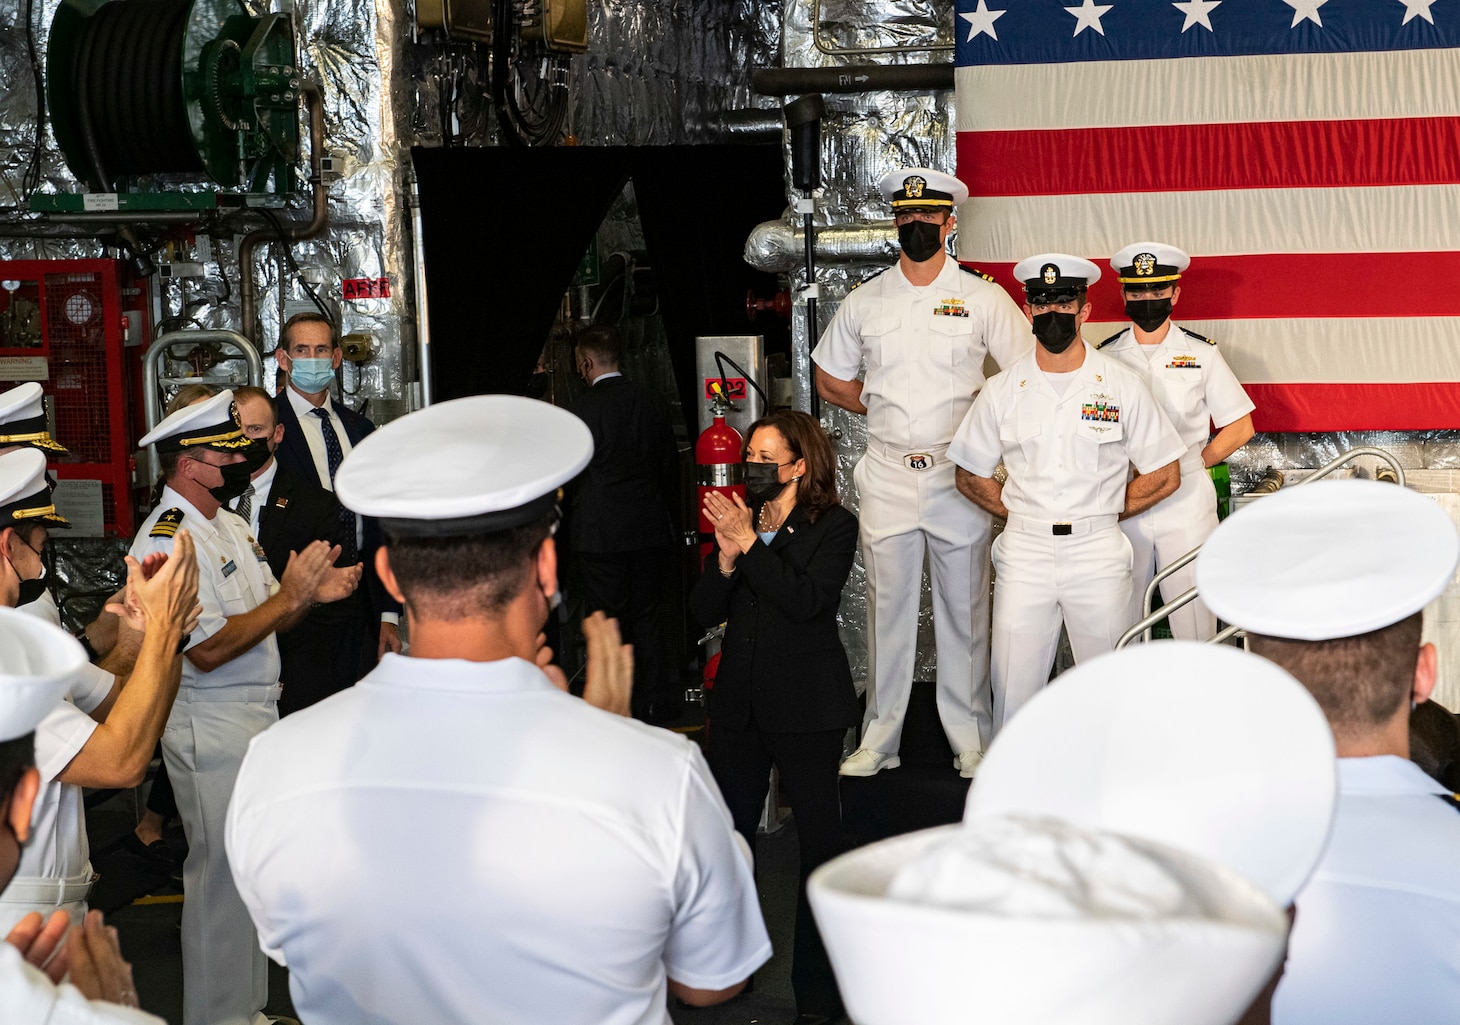 Vice President Kamala Harris addresses the crew of the Independence-variant littoral combat ship USS Tulsa (LCS 16) during an all-hands call, Aug. 23, 2021.